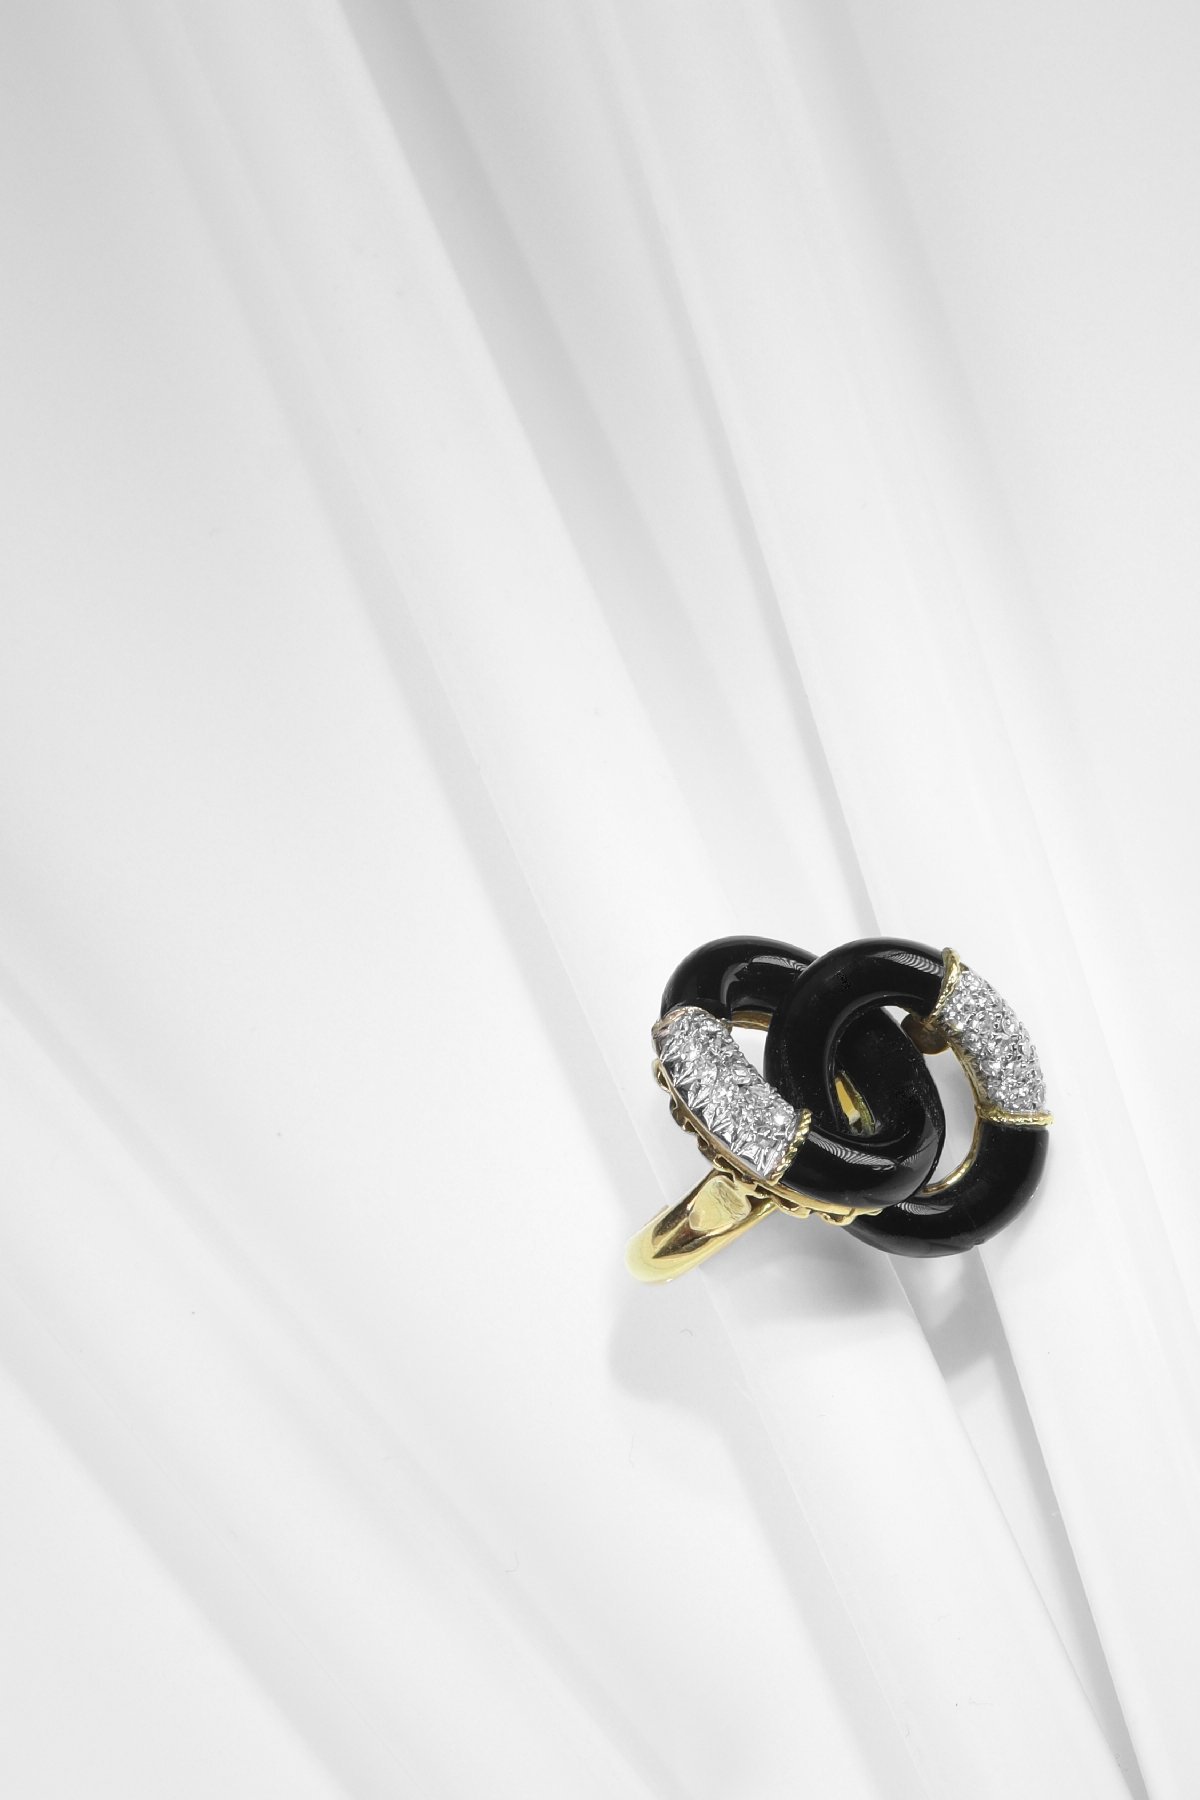 Click the picture to get to see this Vintage Seventies ring with onyx and diamonds.